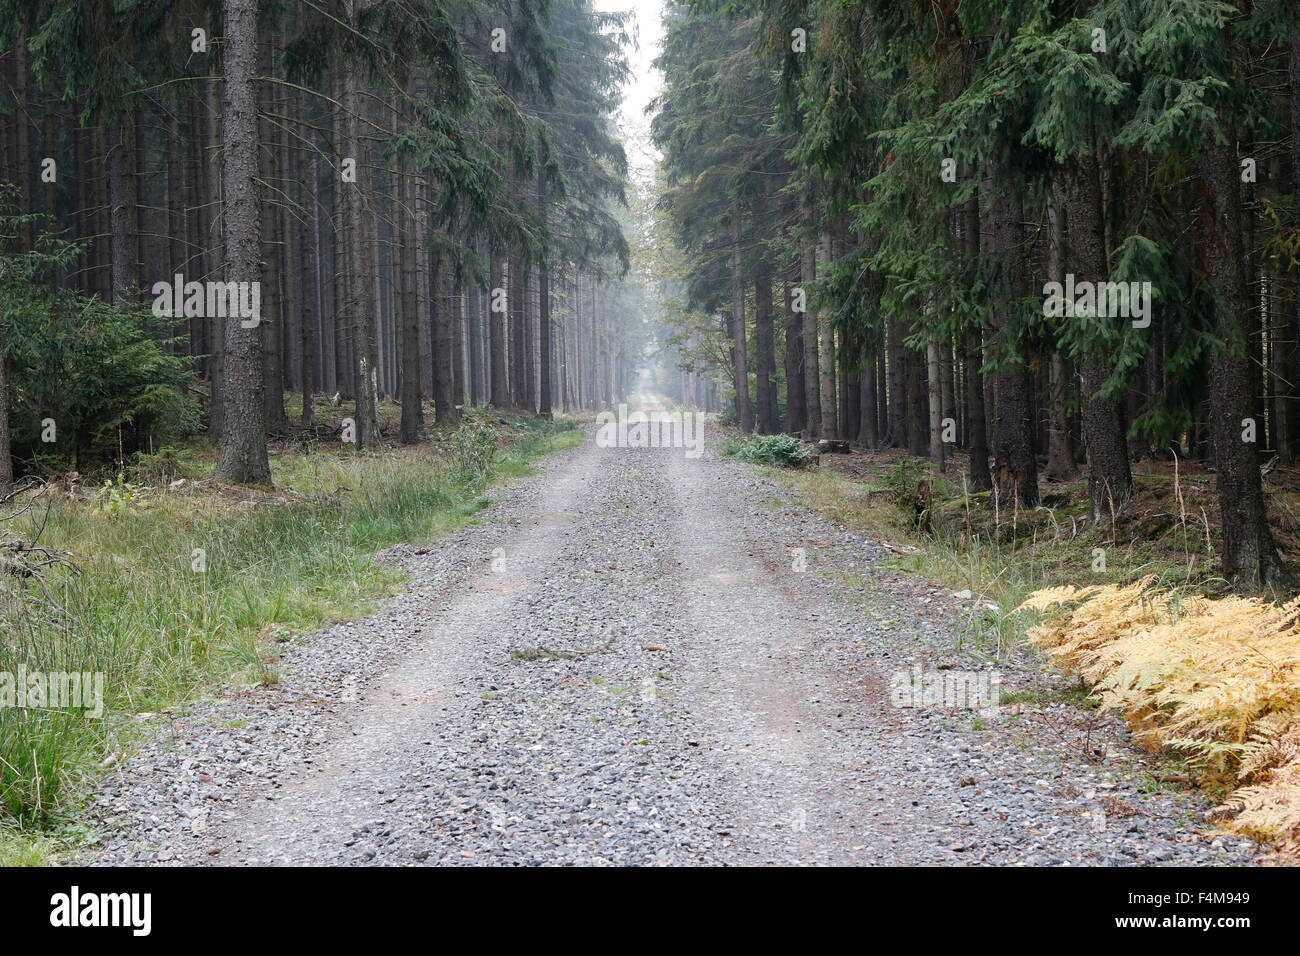 forest path in coniferous forest Stock Photo